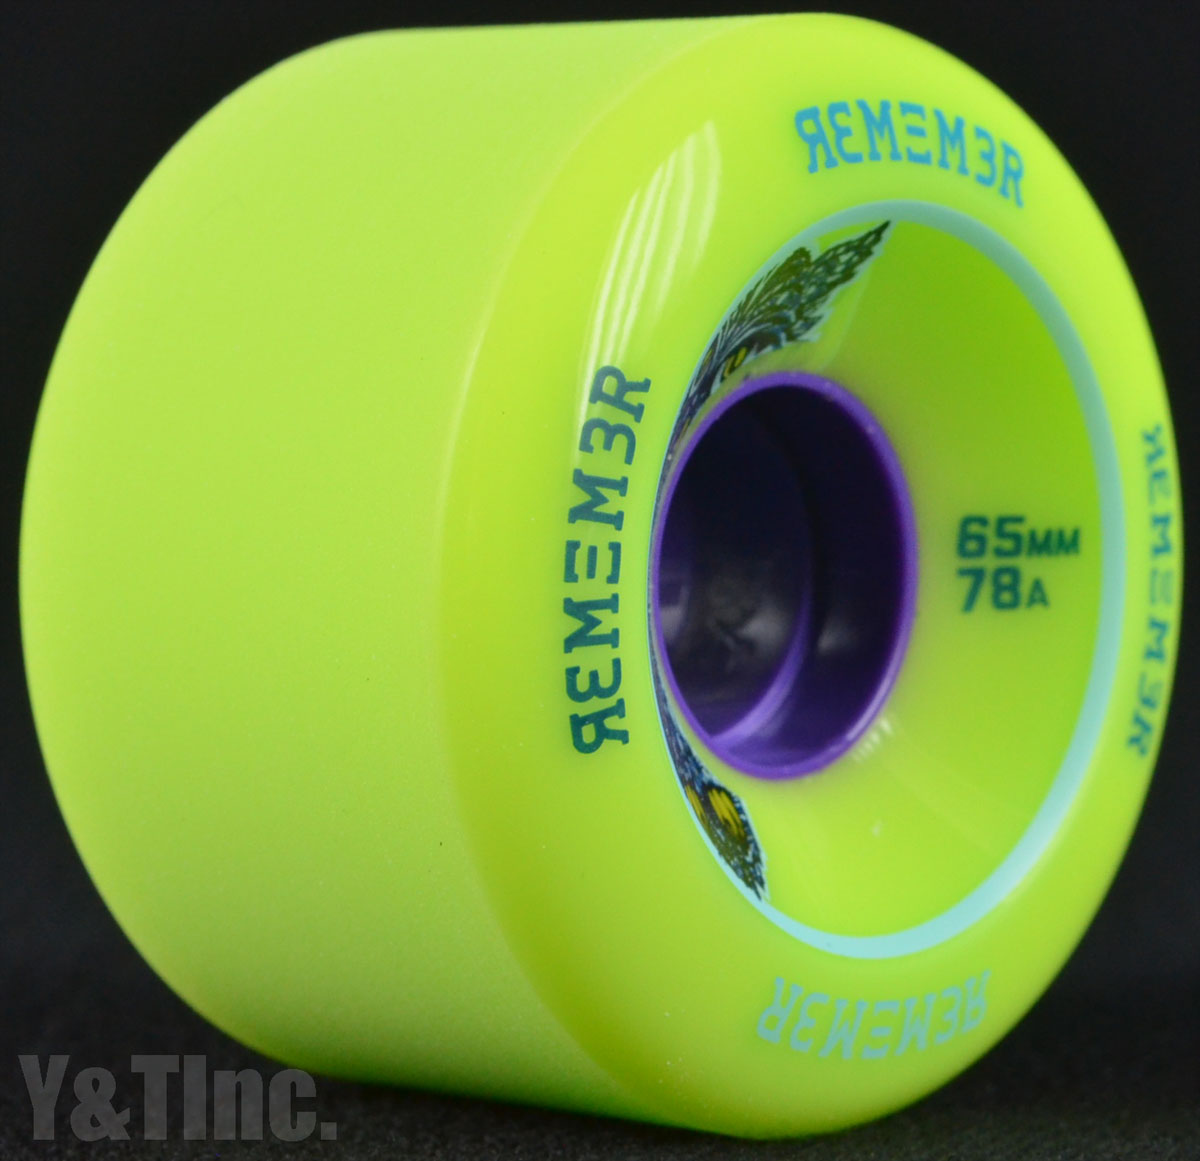 REMEMBER LiL Hoot 65mm 78a Green_2